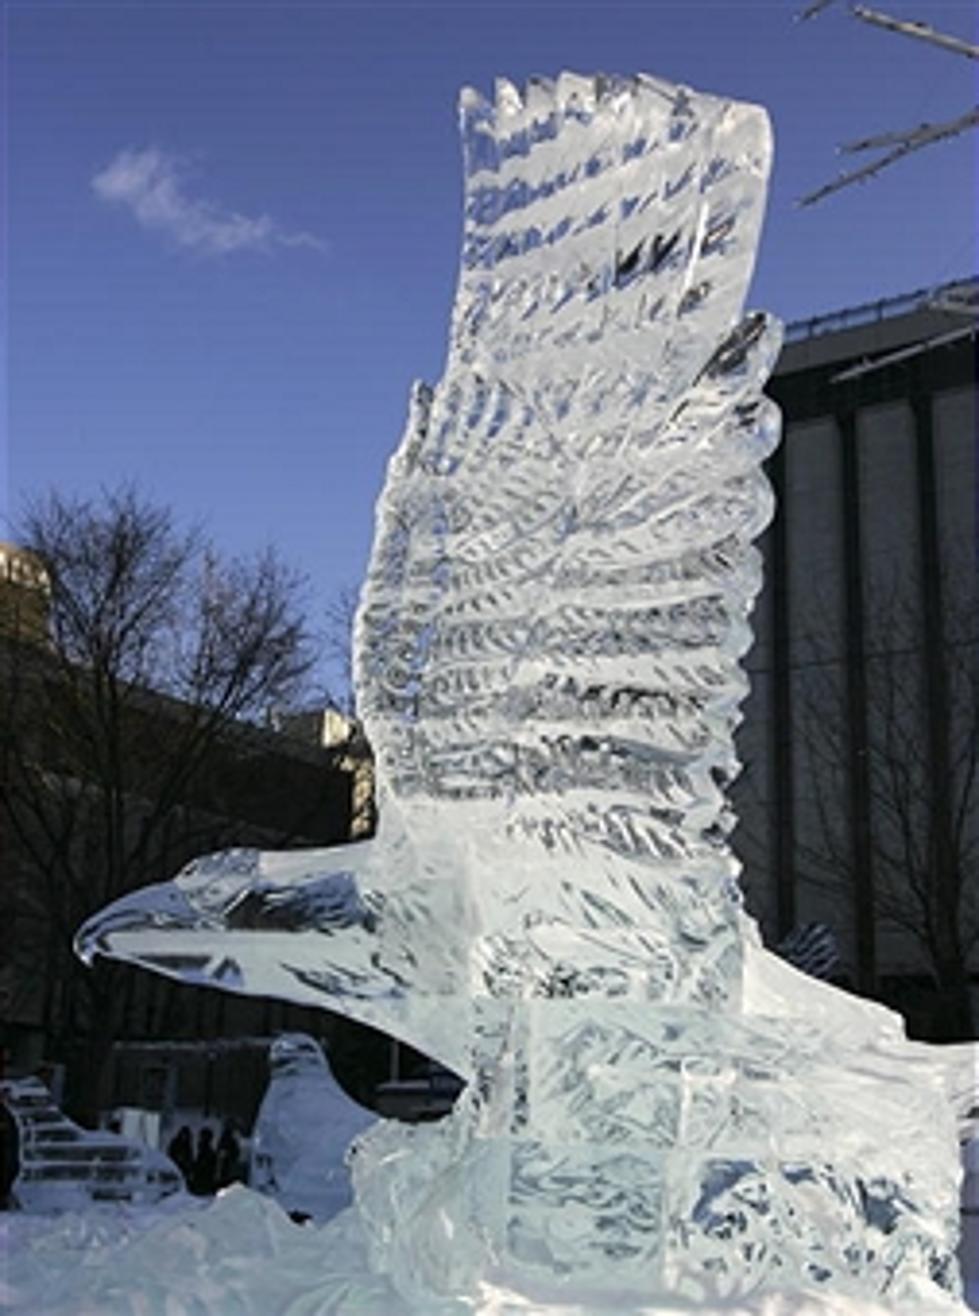 Snow Sculpting and Ice Carving Competitions During Zehnder’s Snowfest